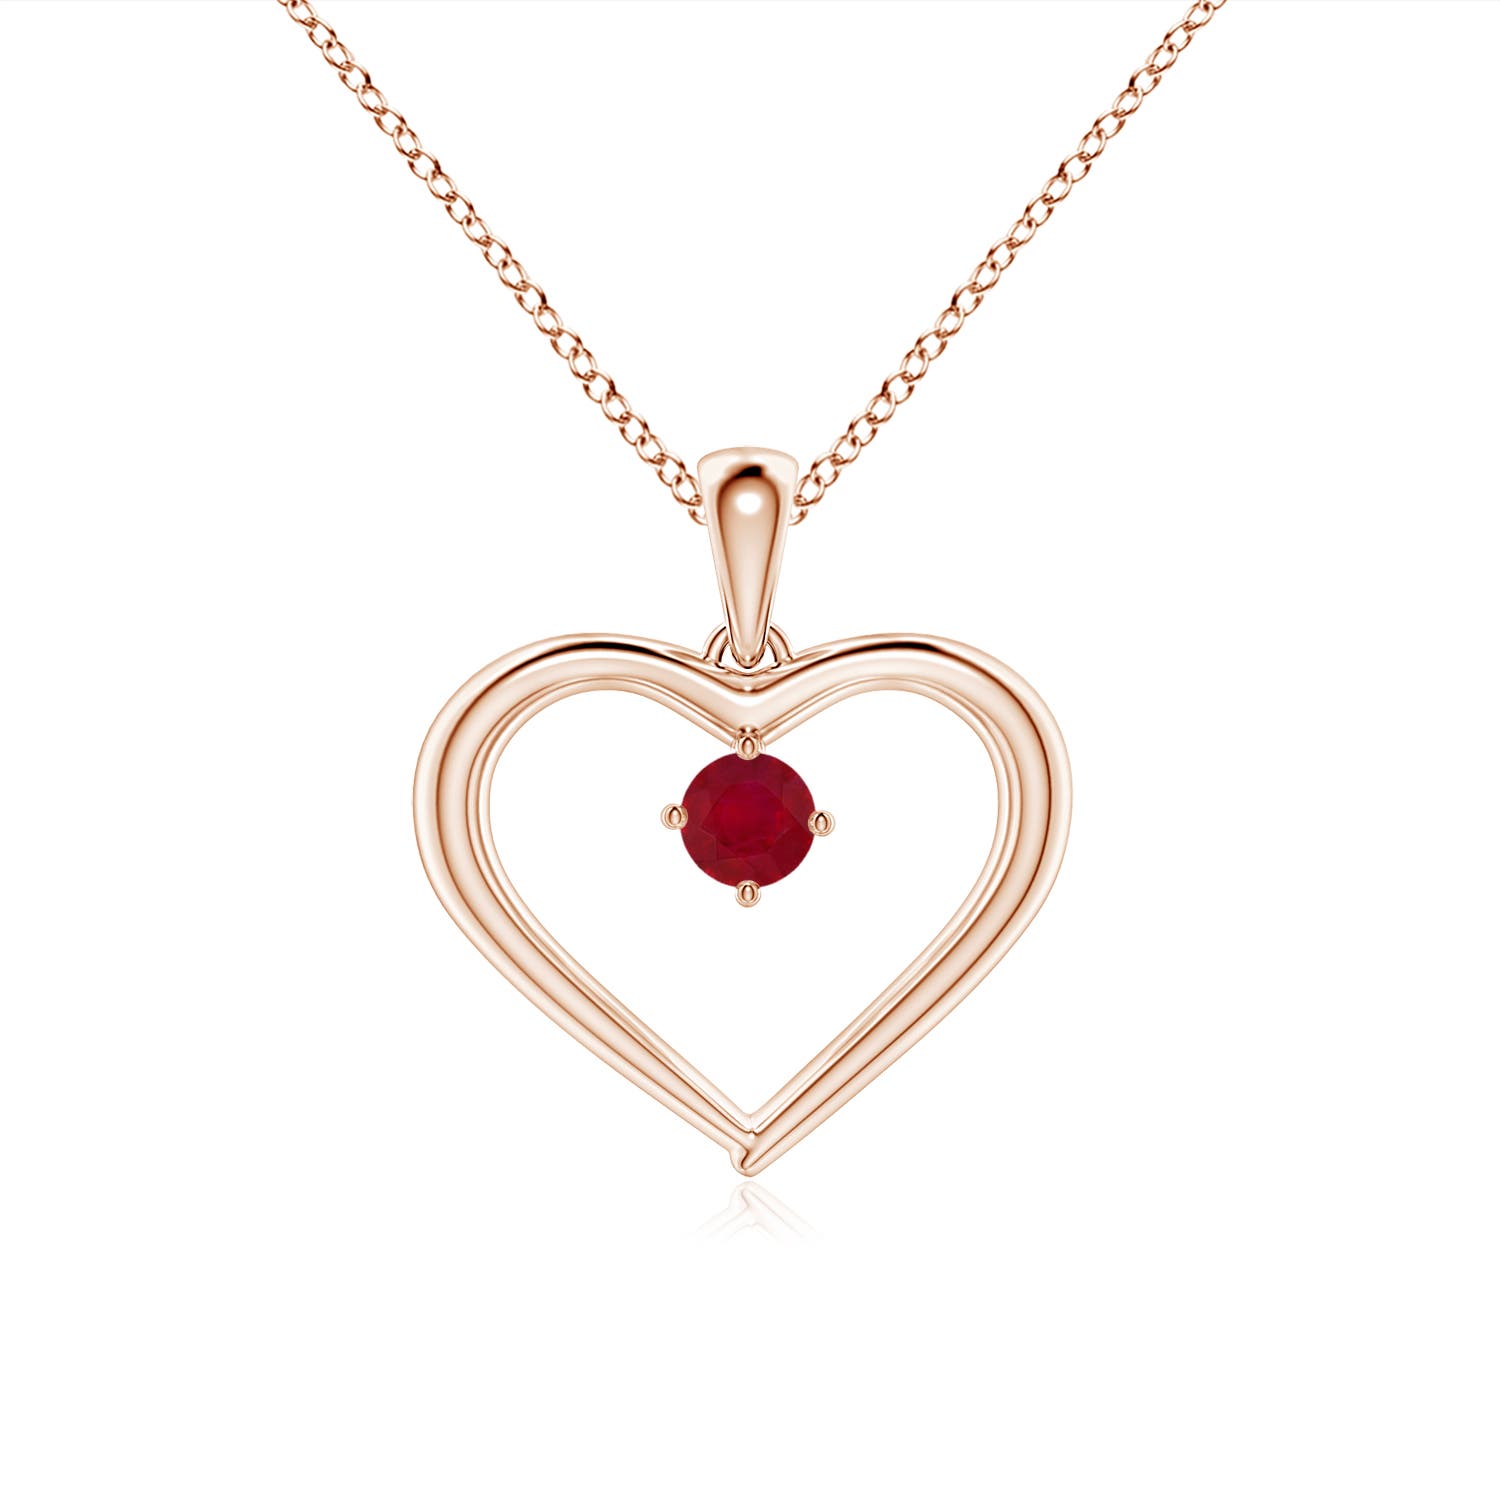 AA - Ruby / 0.15 CT / 14 KT Rose Gold